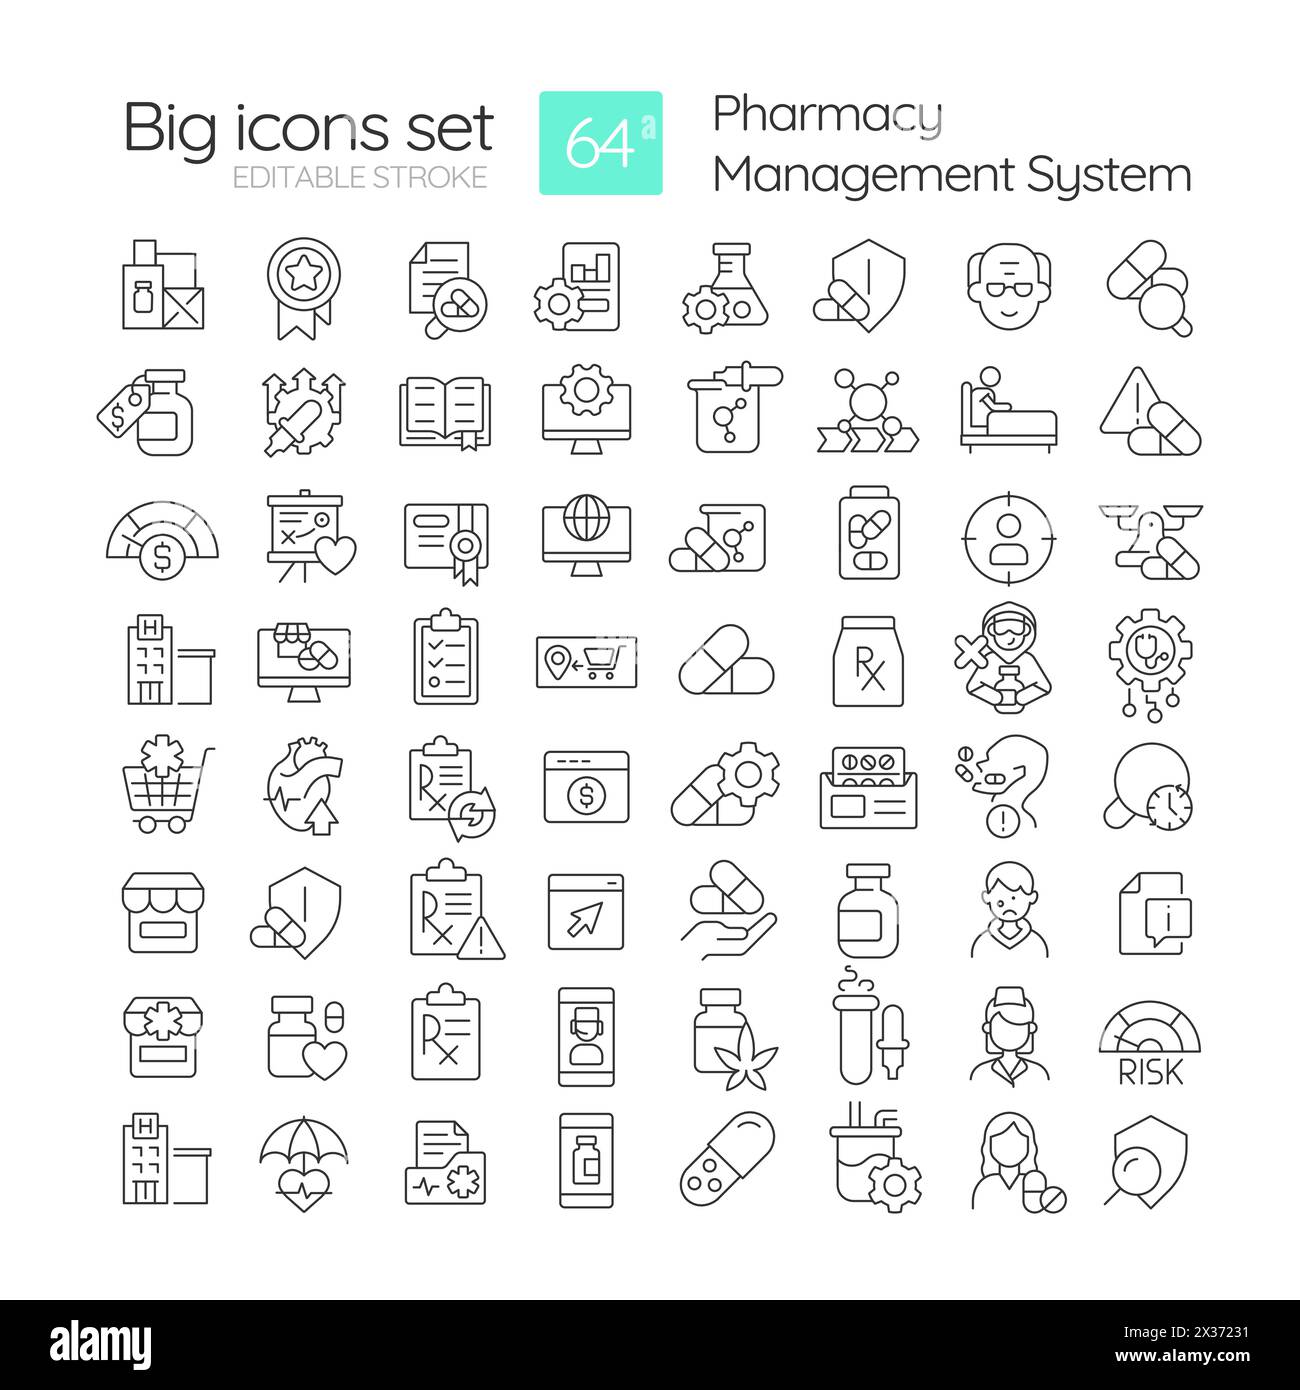 Pharmacy management system linear icons set Stock Vector